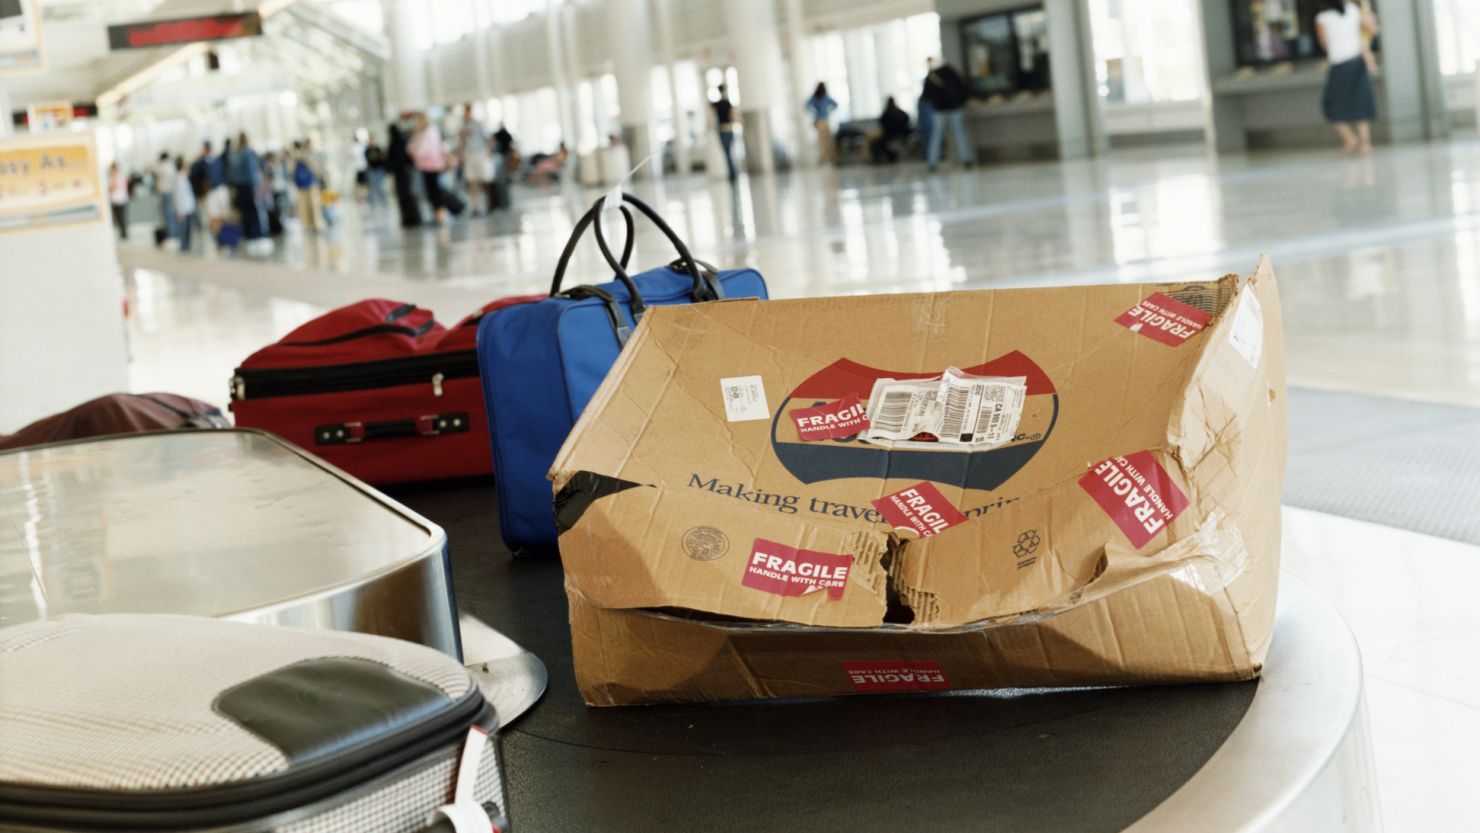 The number of mishandled bags per person in the U.S. increased in 2013, as did fees to check them.